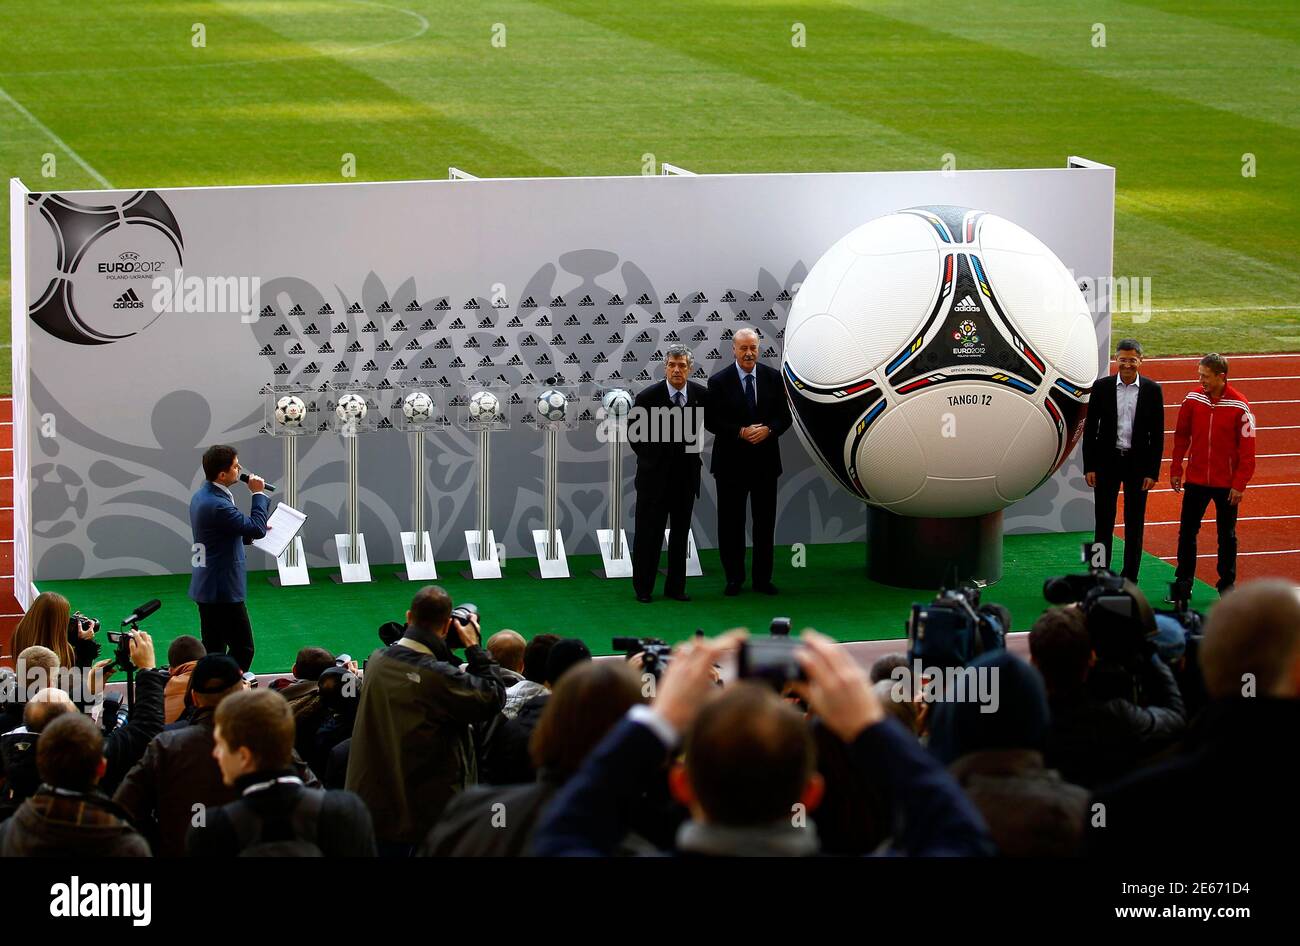 CEO of German sports manufacturer Adidas, Herbert Hainer (R) and Spain's  soccer team coach Vicente del Bosque (L) unveil a giant model of the  official match ball for the upcoming Euro 2012